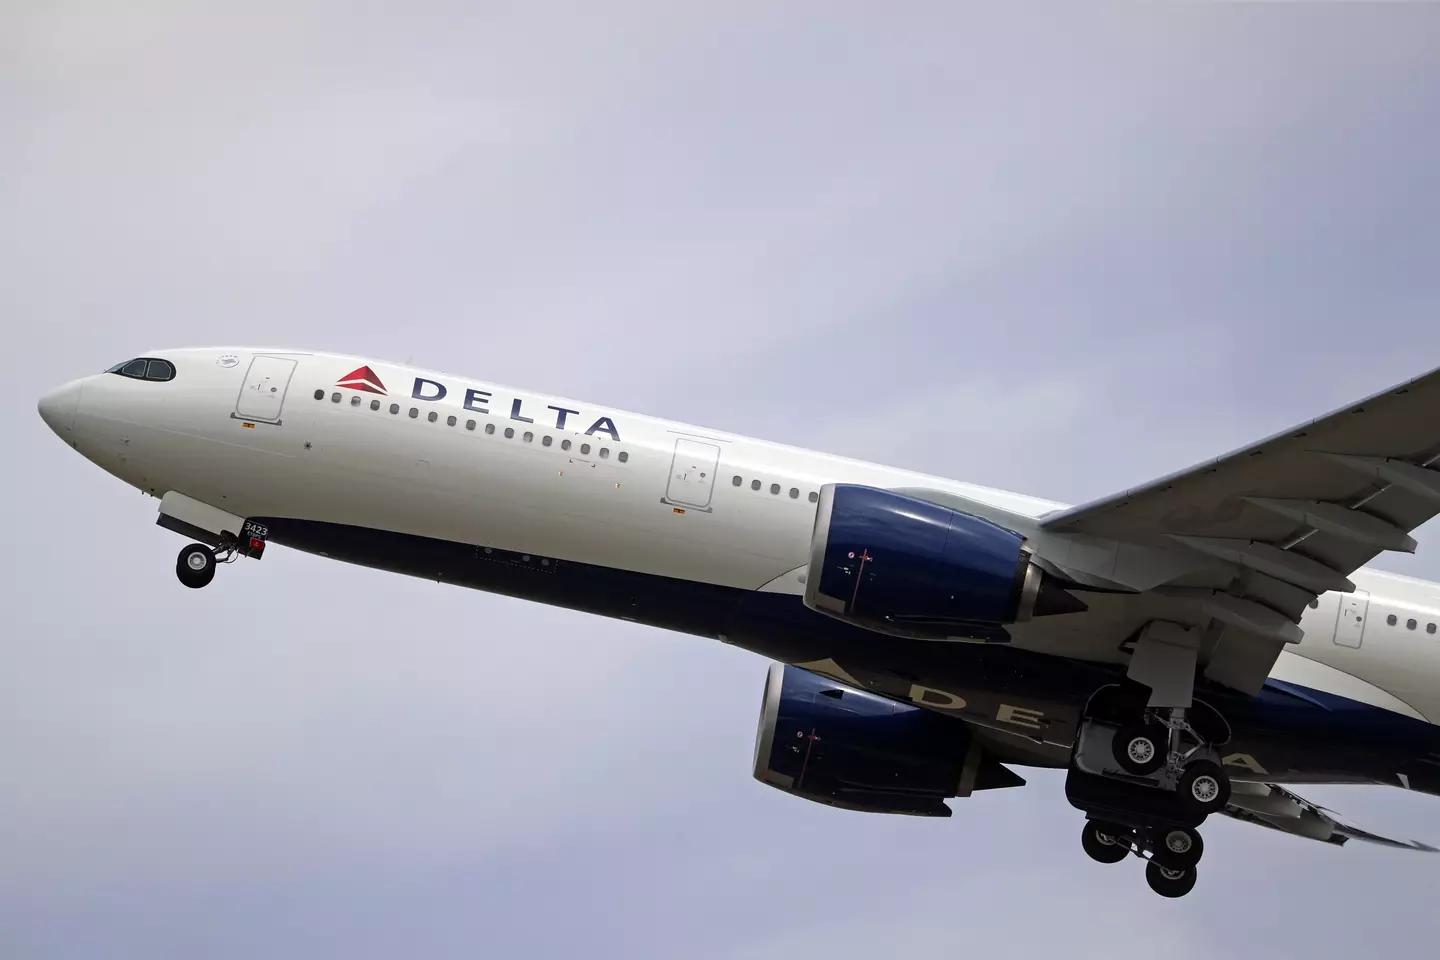 The Delta flight had to be diverted.